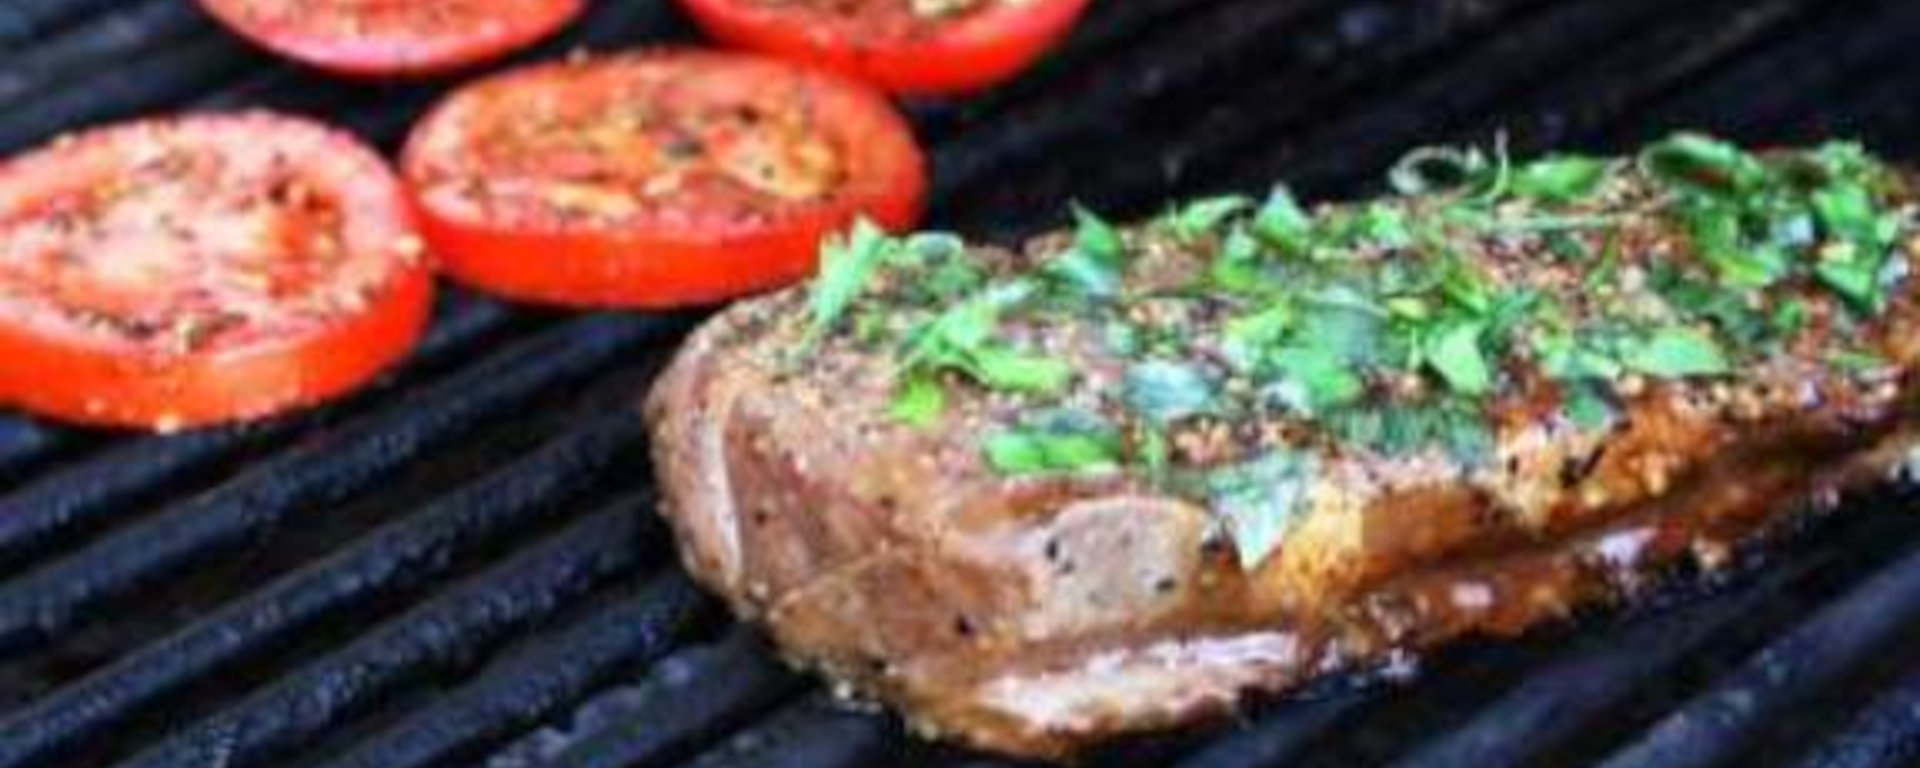 Grilled Steaks And Tomatoes With Basil Garlic Bread